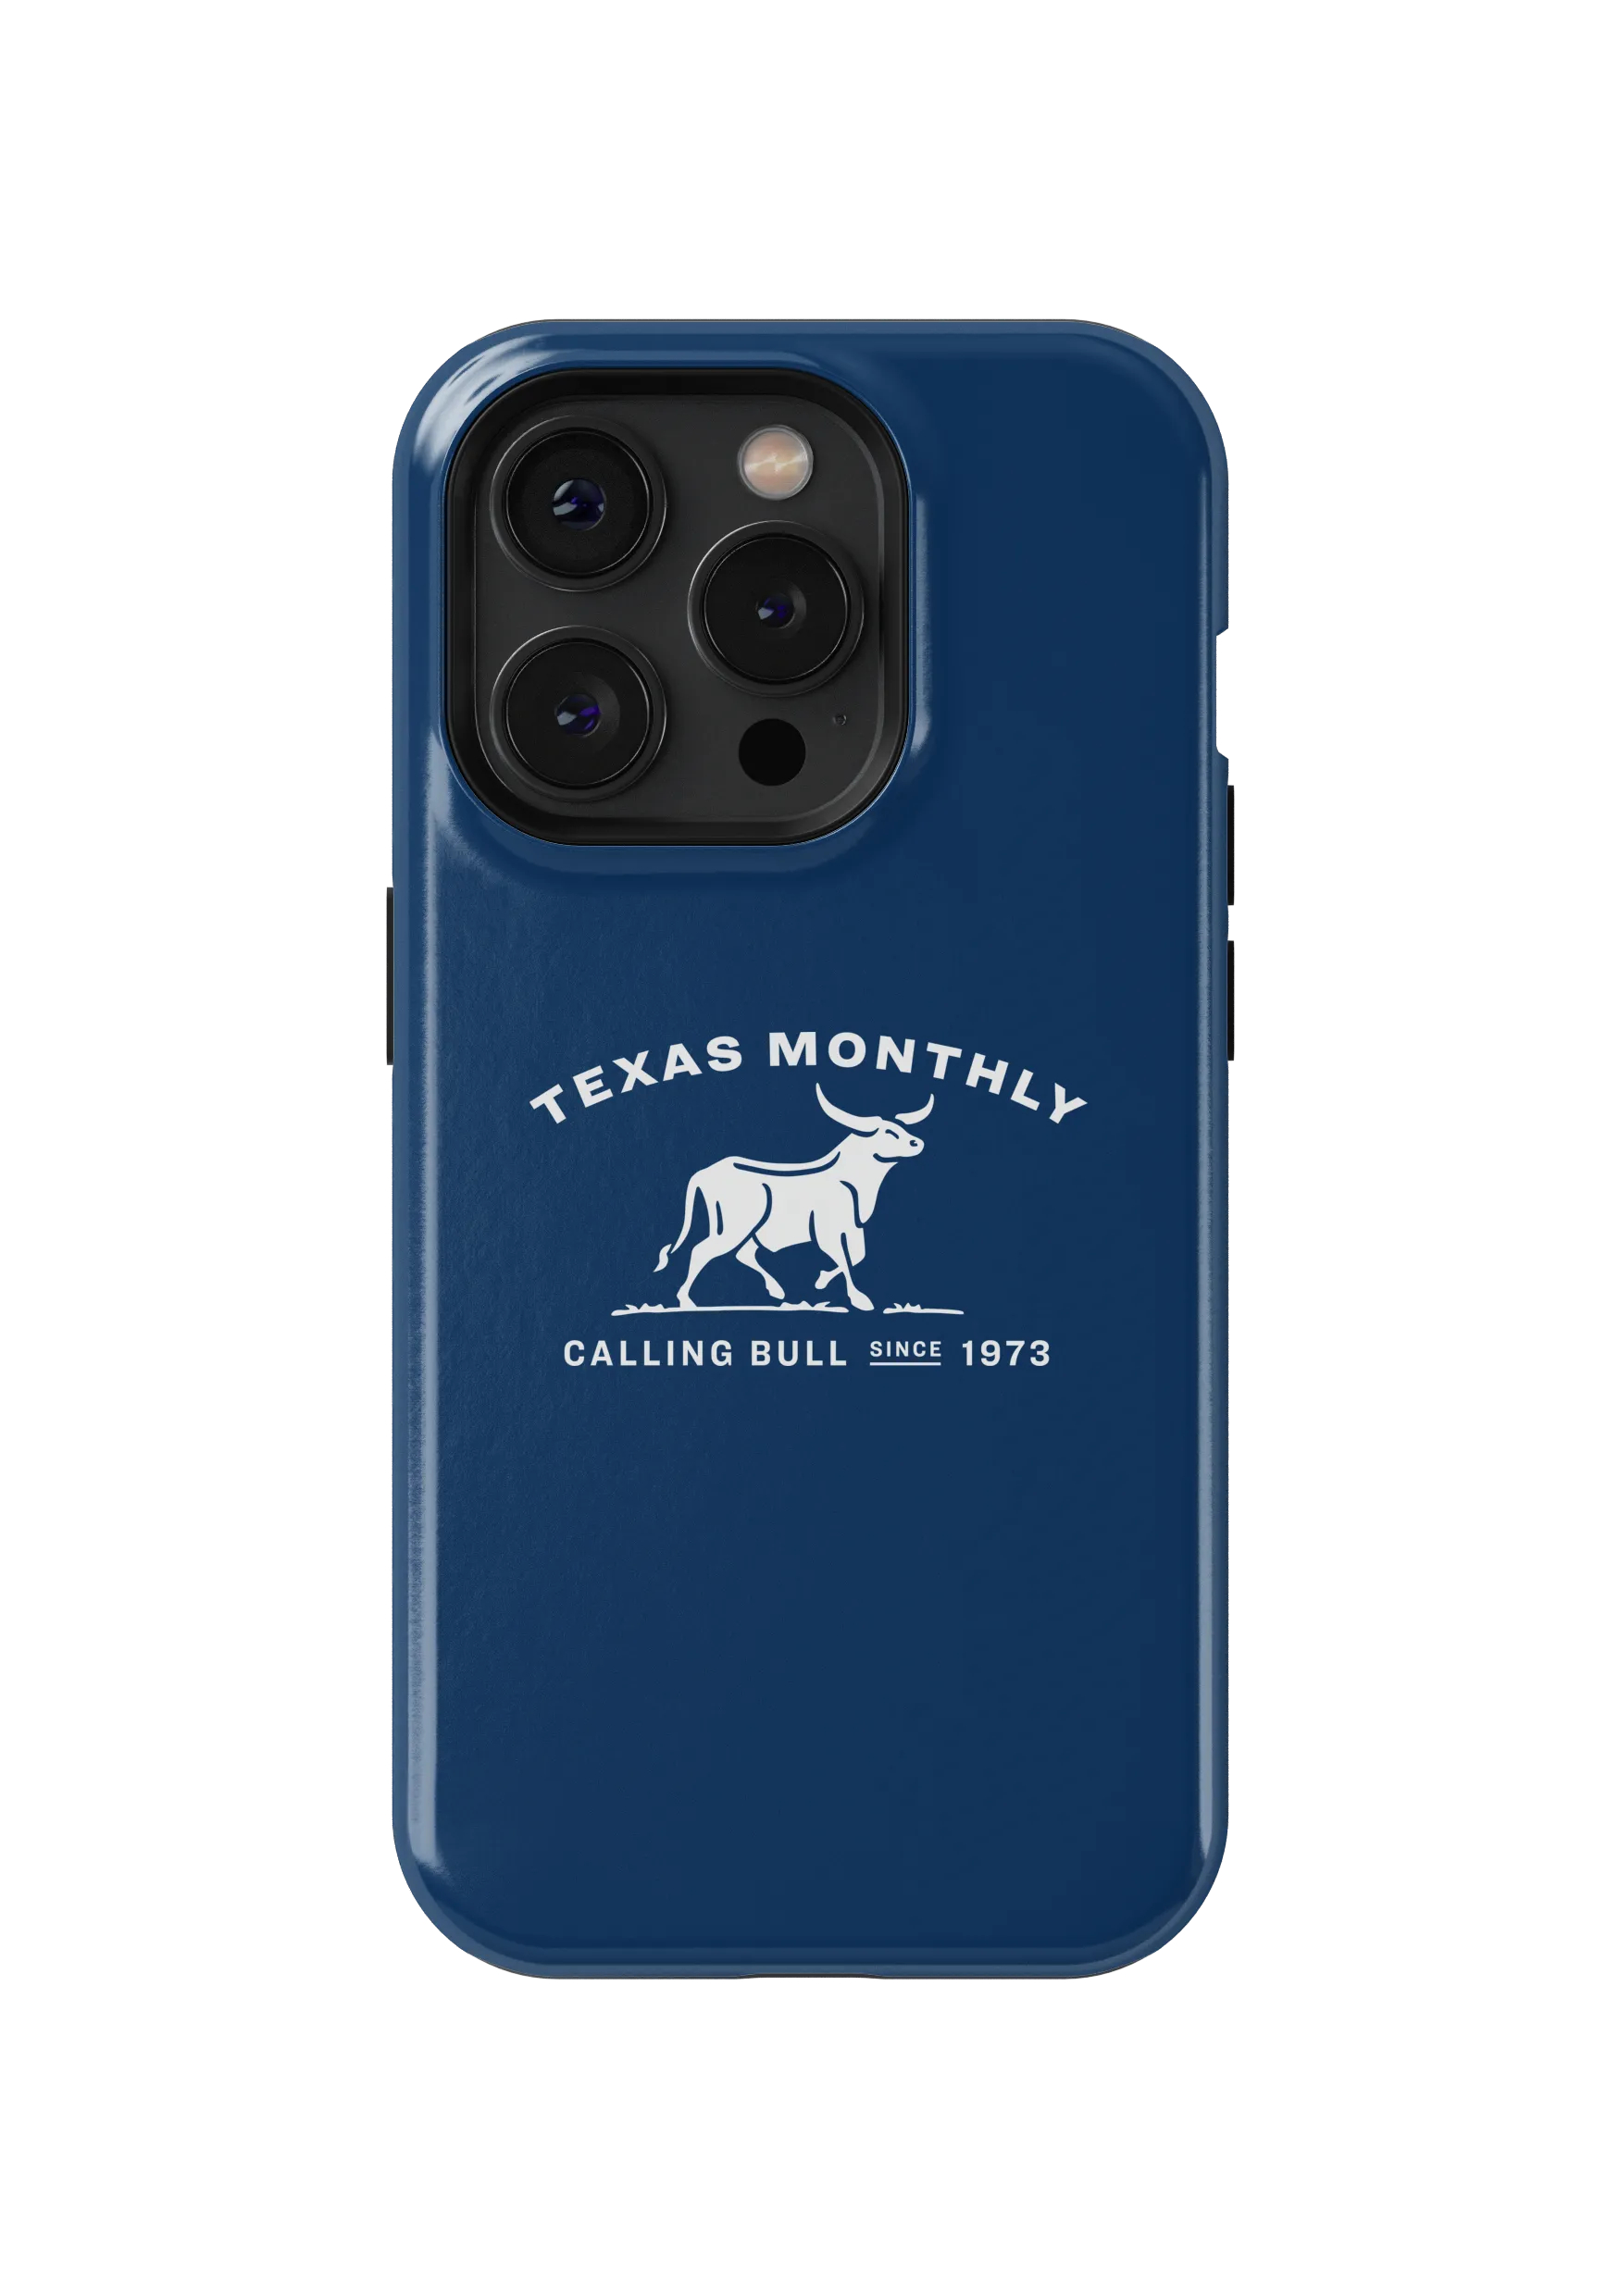 Texas Monthly Calling Bull Phone Case” graphic phone case by Texas